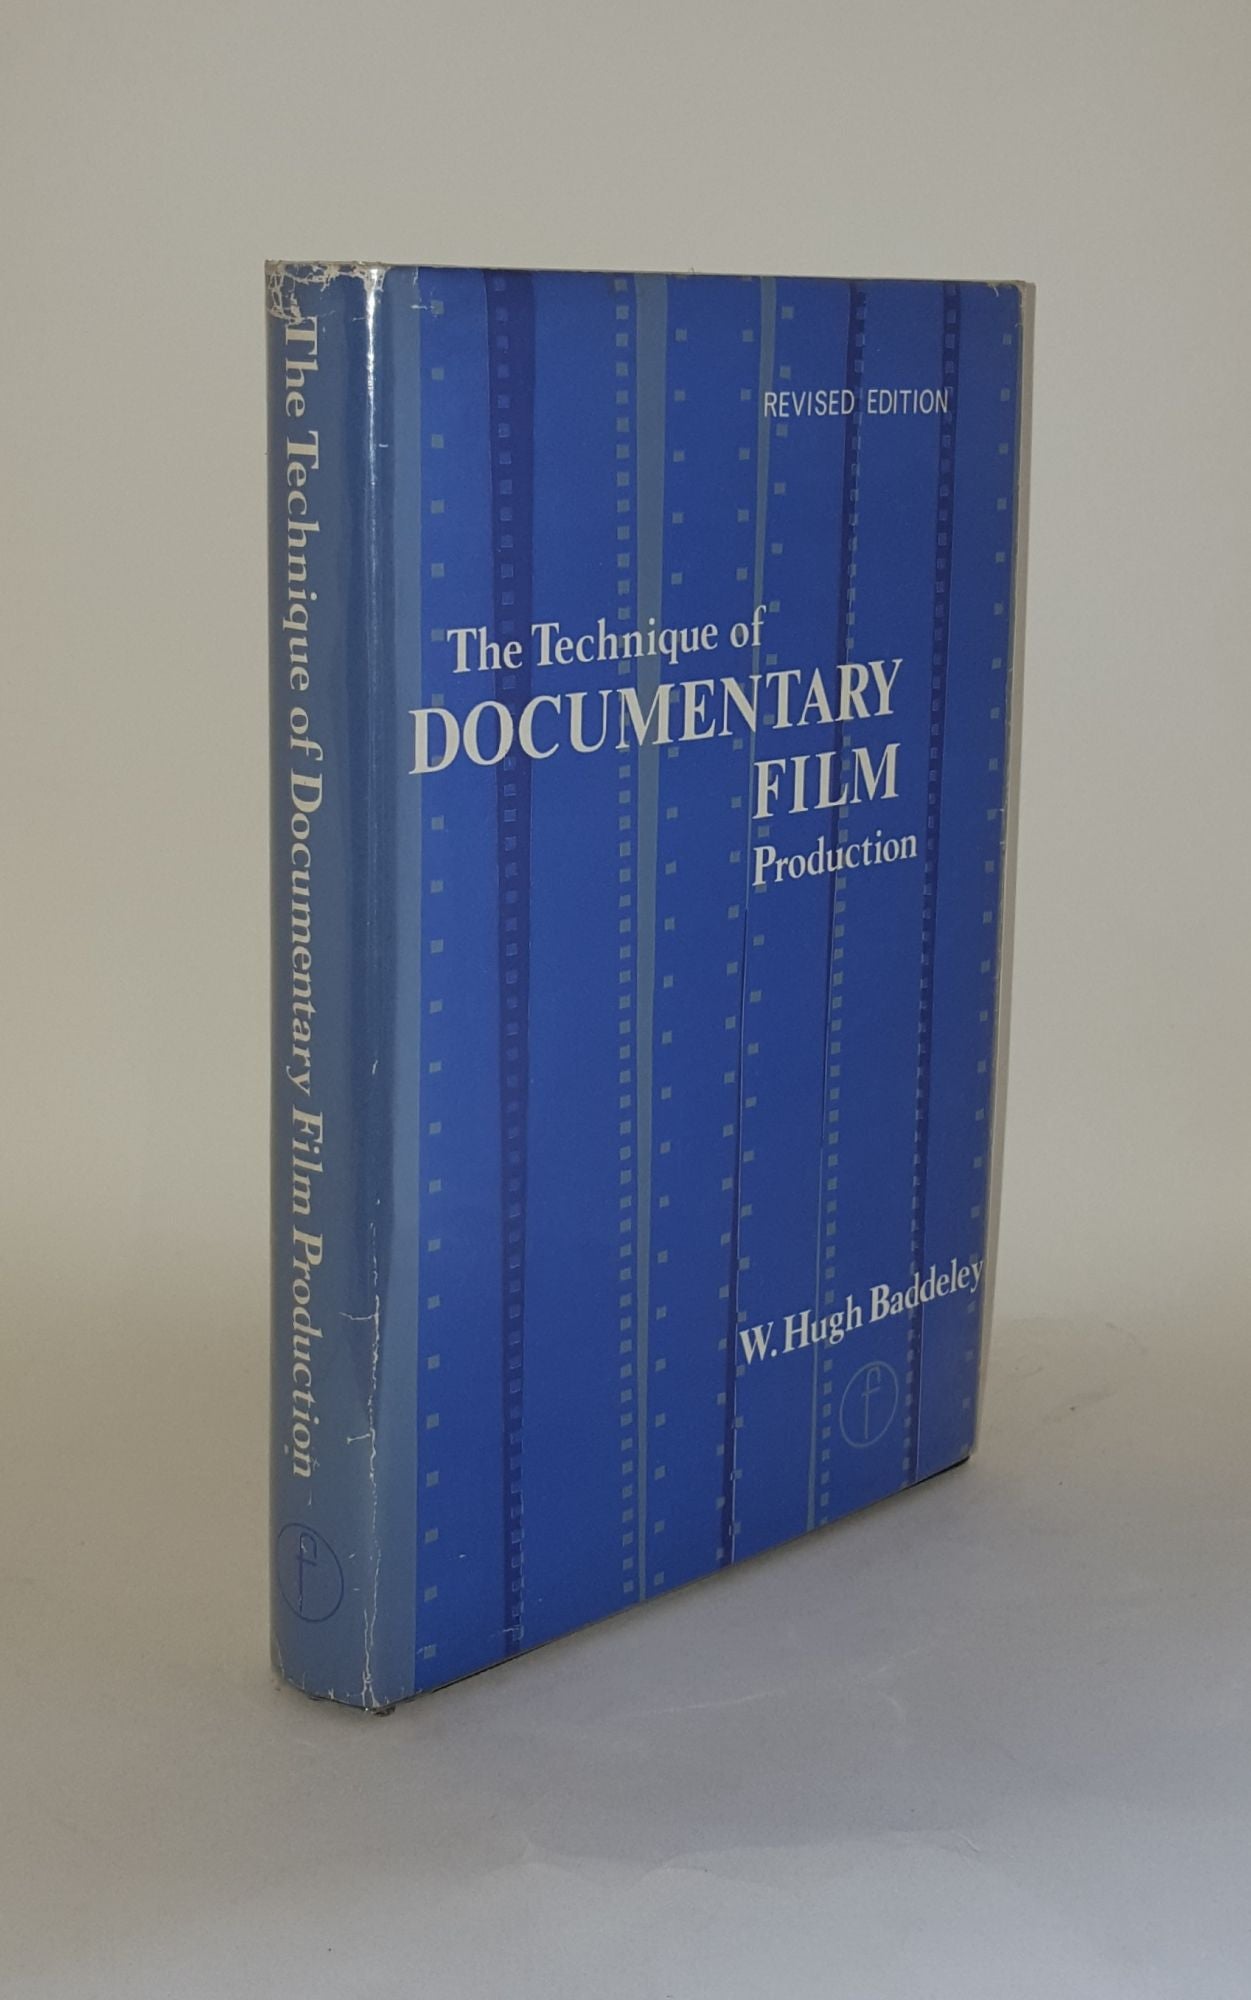 BADDELEY W. Hugh - The Technique of Documentary Film Production